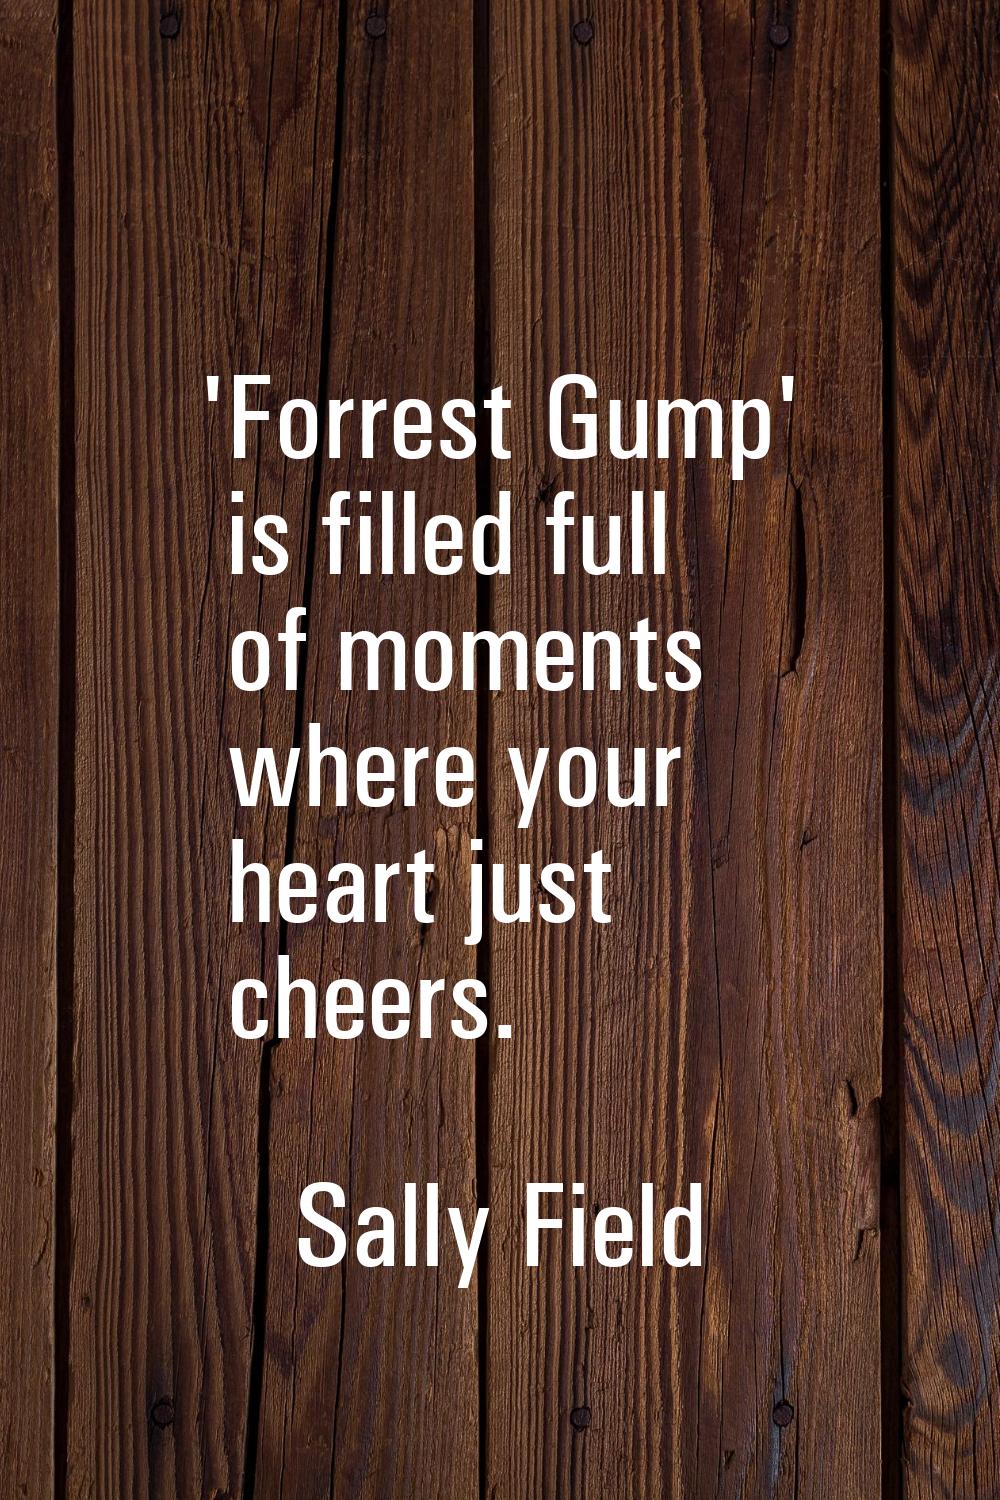 'Forrest Gump' is filled full of moments where your heart just cheers.